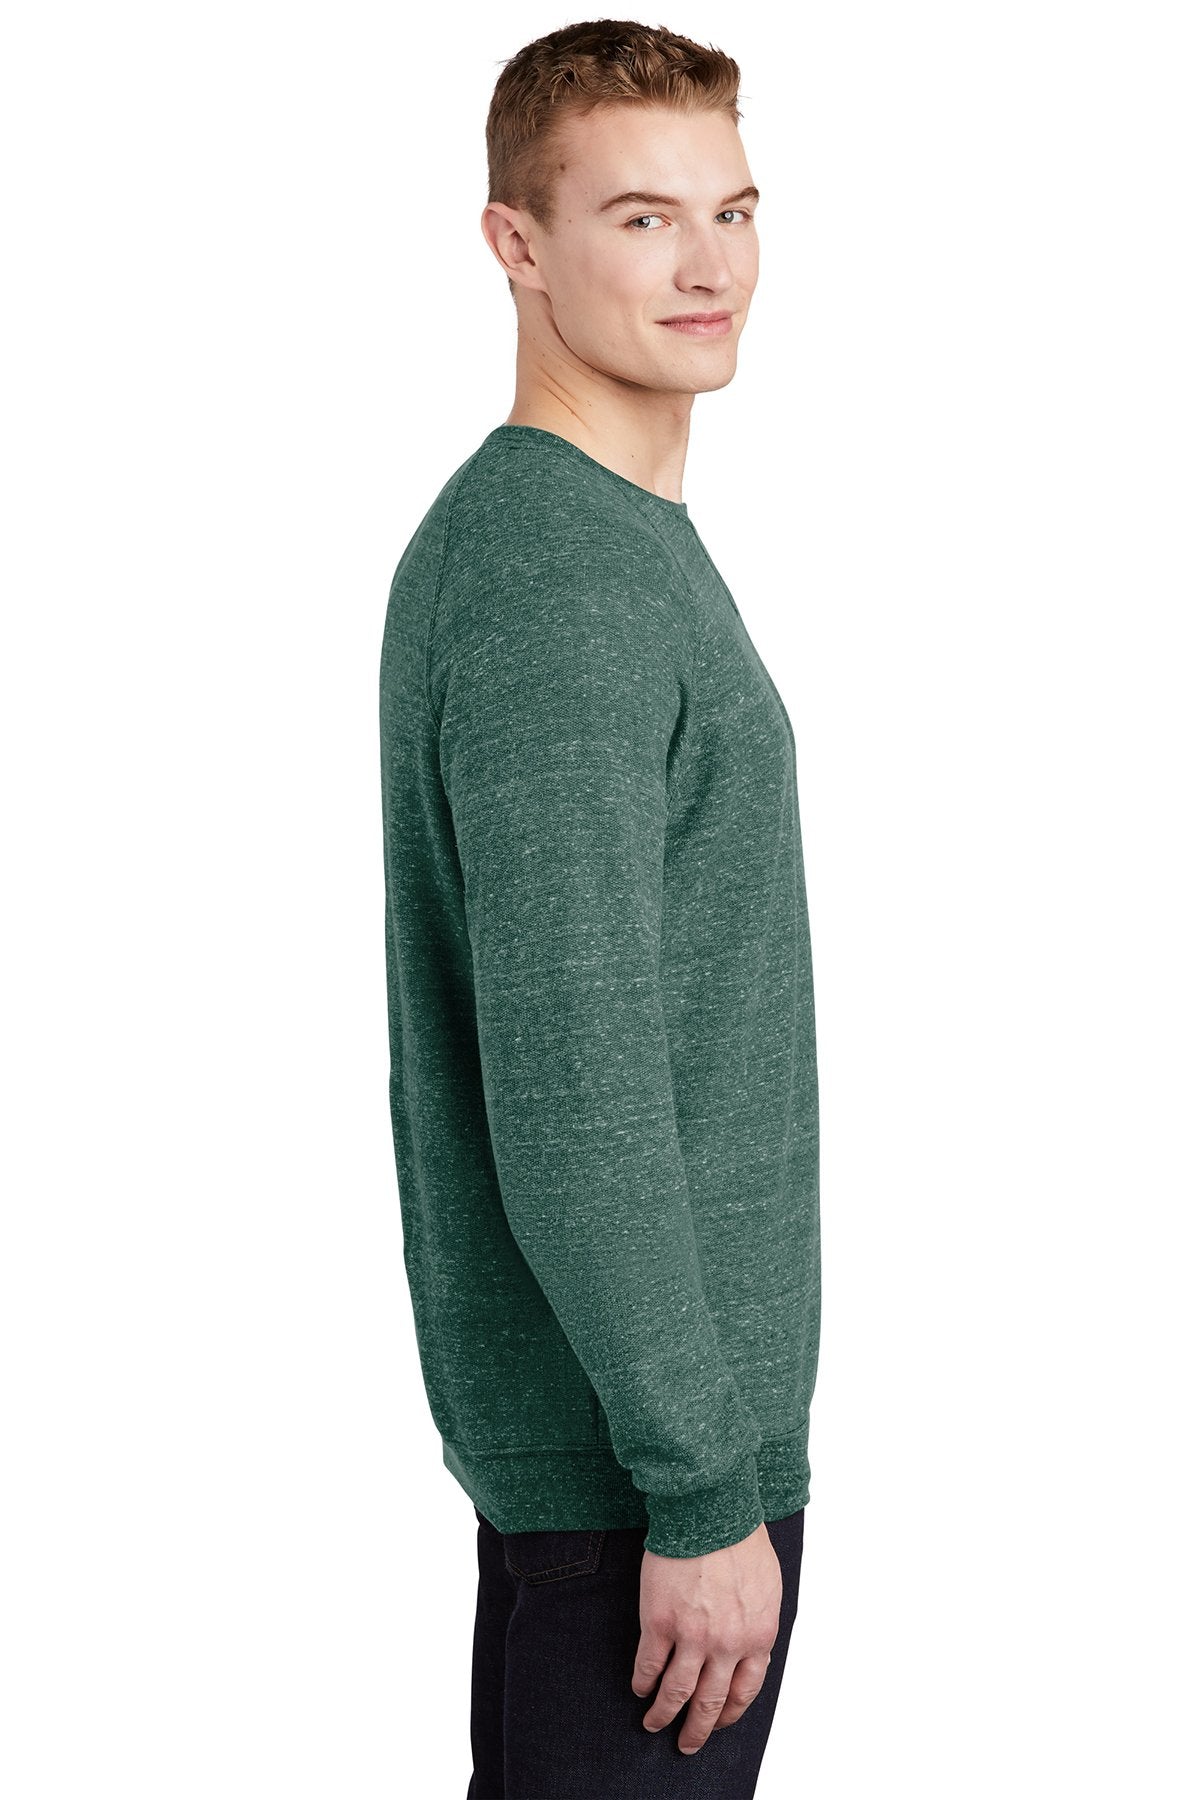 Jerzees Snow Heather French Terry Raglan Crew 91M Forest Green